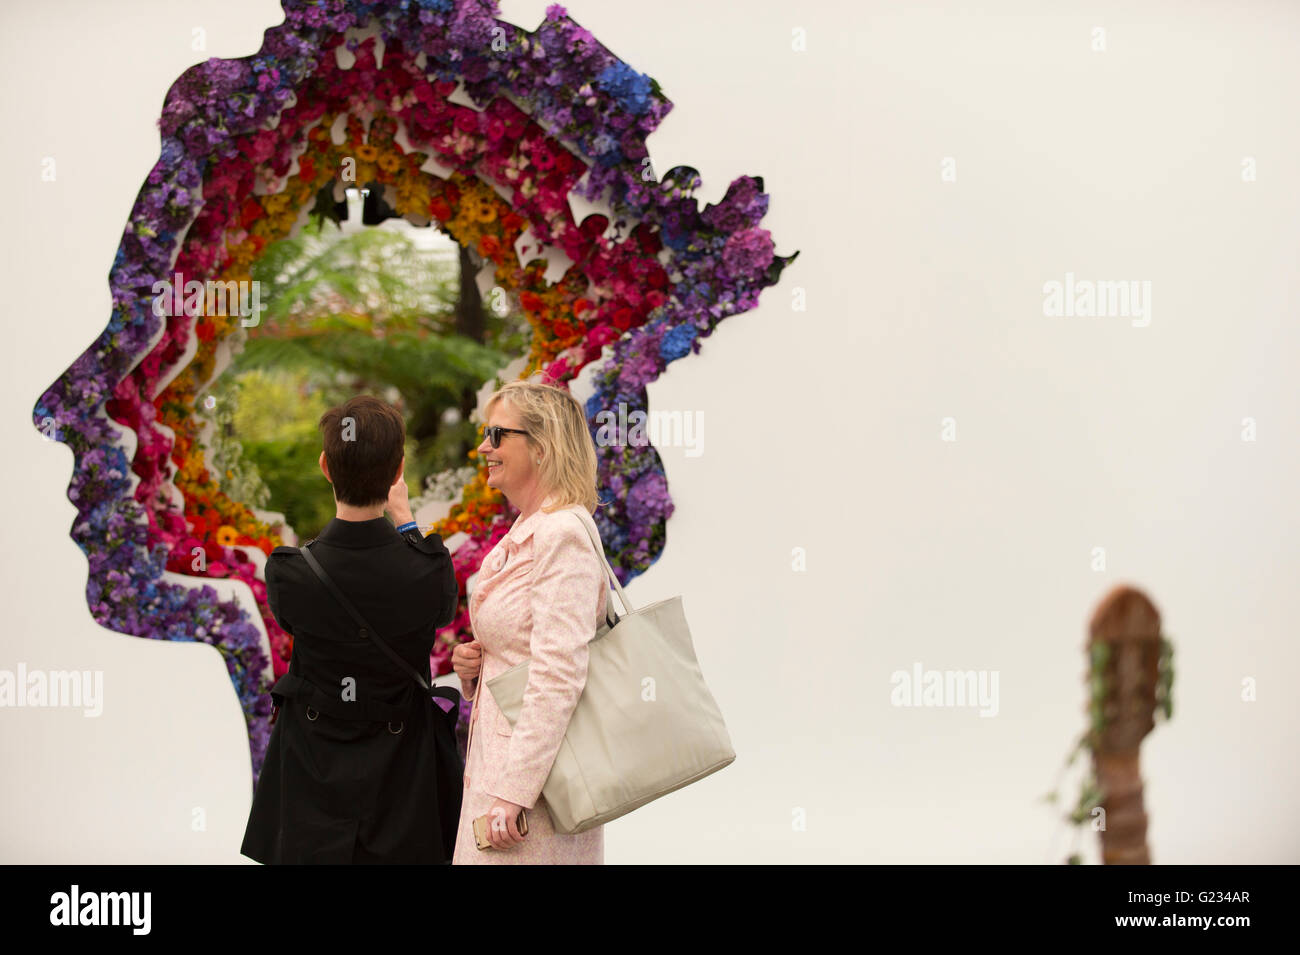 Chelsea, London UK. 23rd May 2016. BBC Weather Presenter Carol Kirkwood at the Veevers Carter royal tribute flower display, New Covent Garden Flower Market’s debut stand. Press Day for the world famous Chelsea Flower Show. Credit:  Malcolm Park editorial/Alamy Live News. Stock Photo